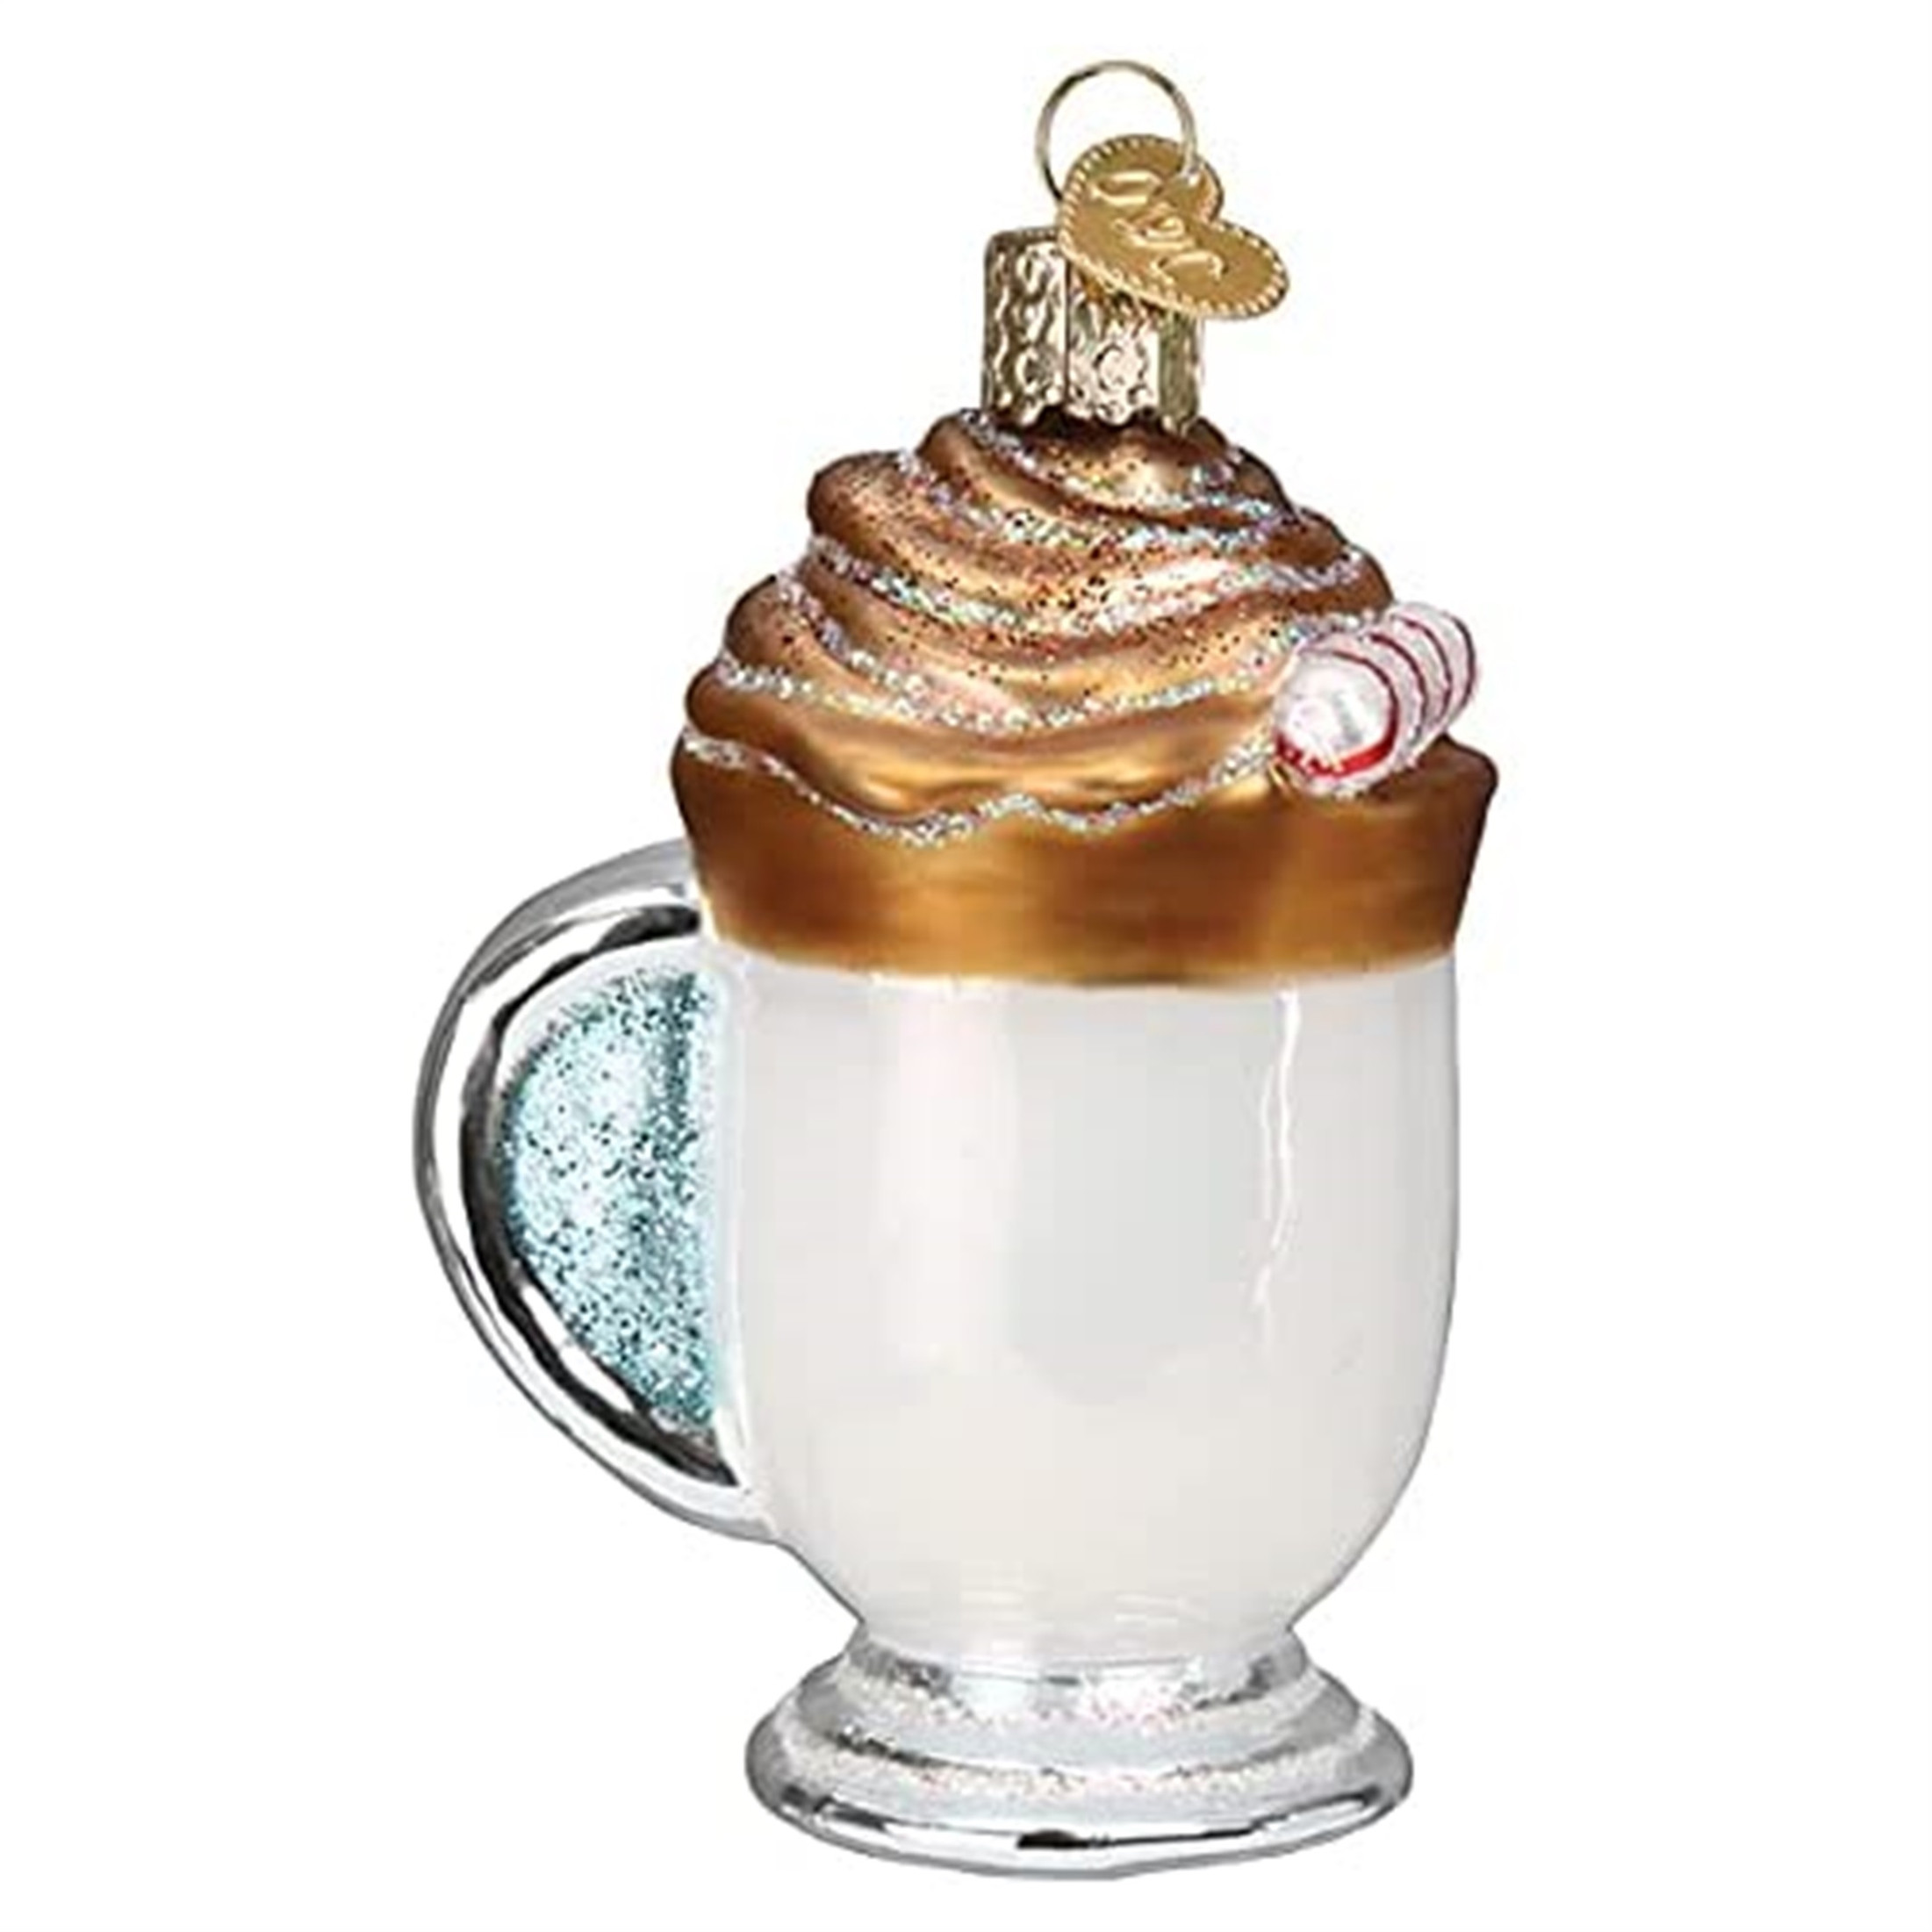 Old World Christmas Glass Blown Ornament, Whipped Coffee, 3.5" (With OWC Gift Box)